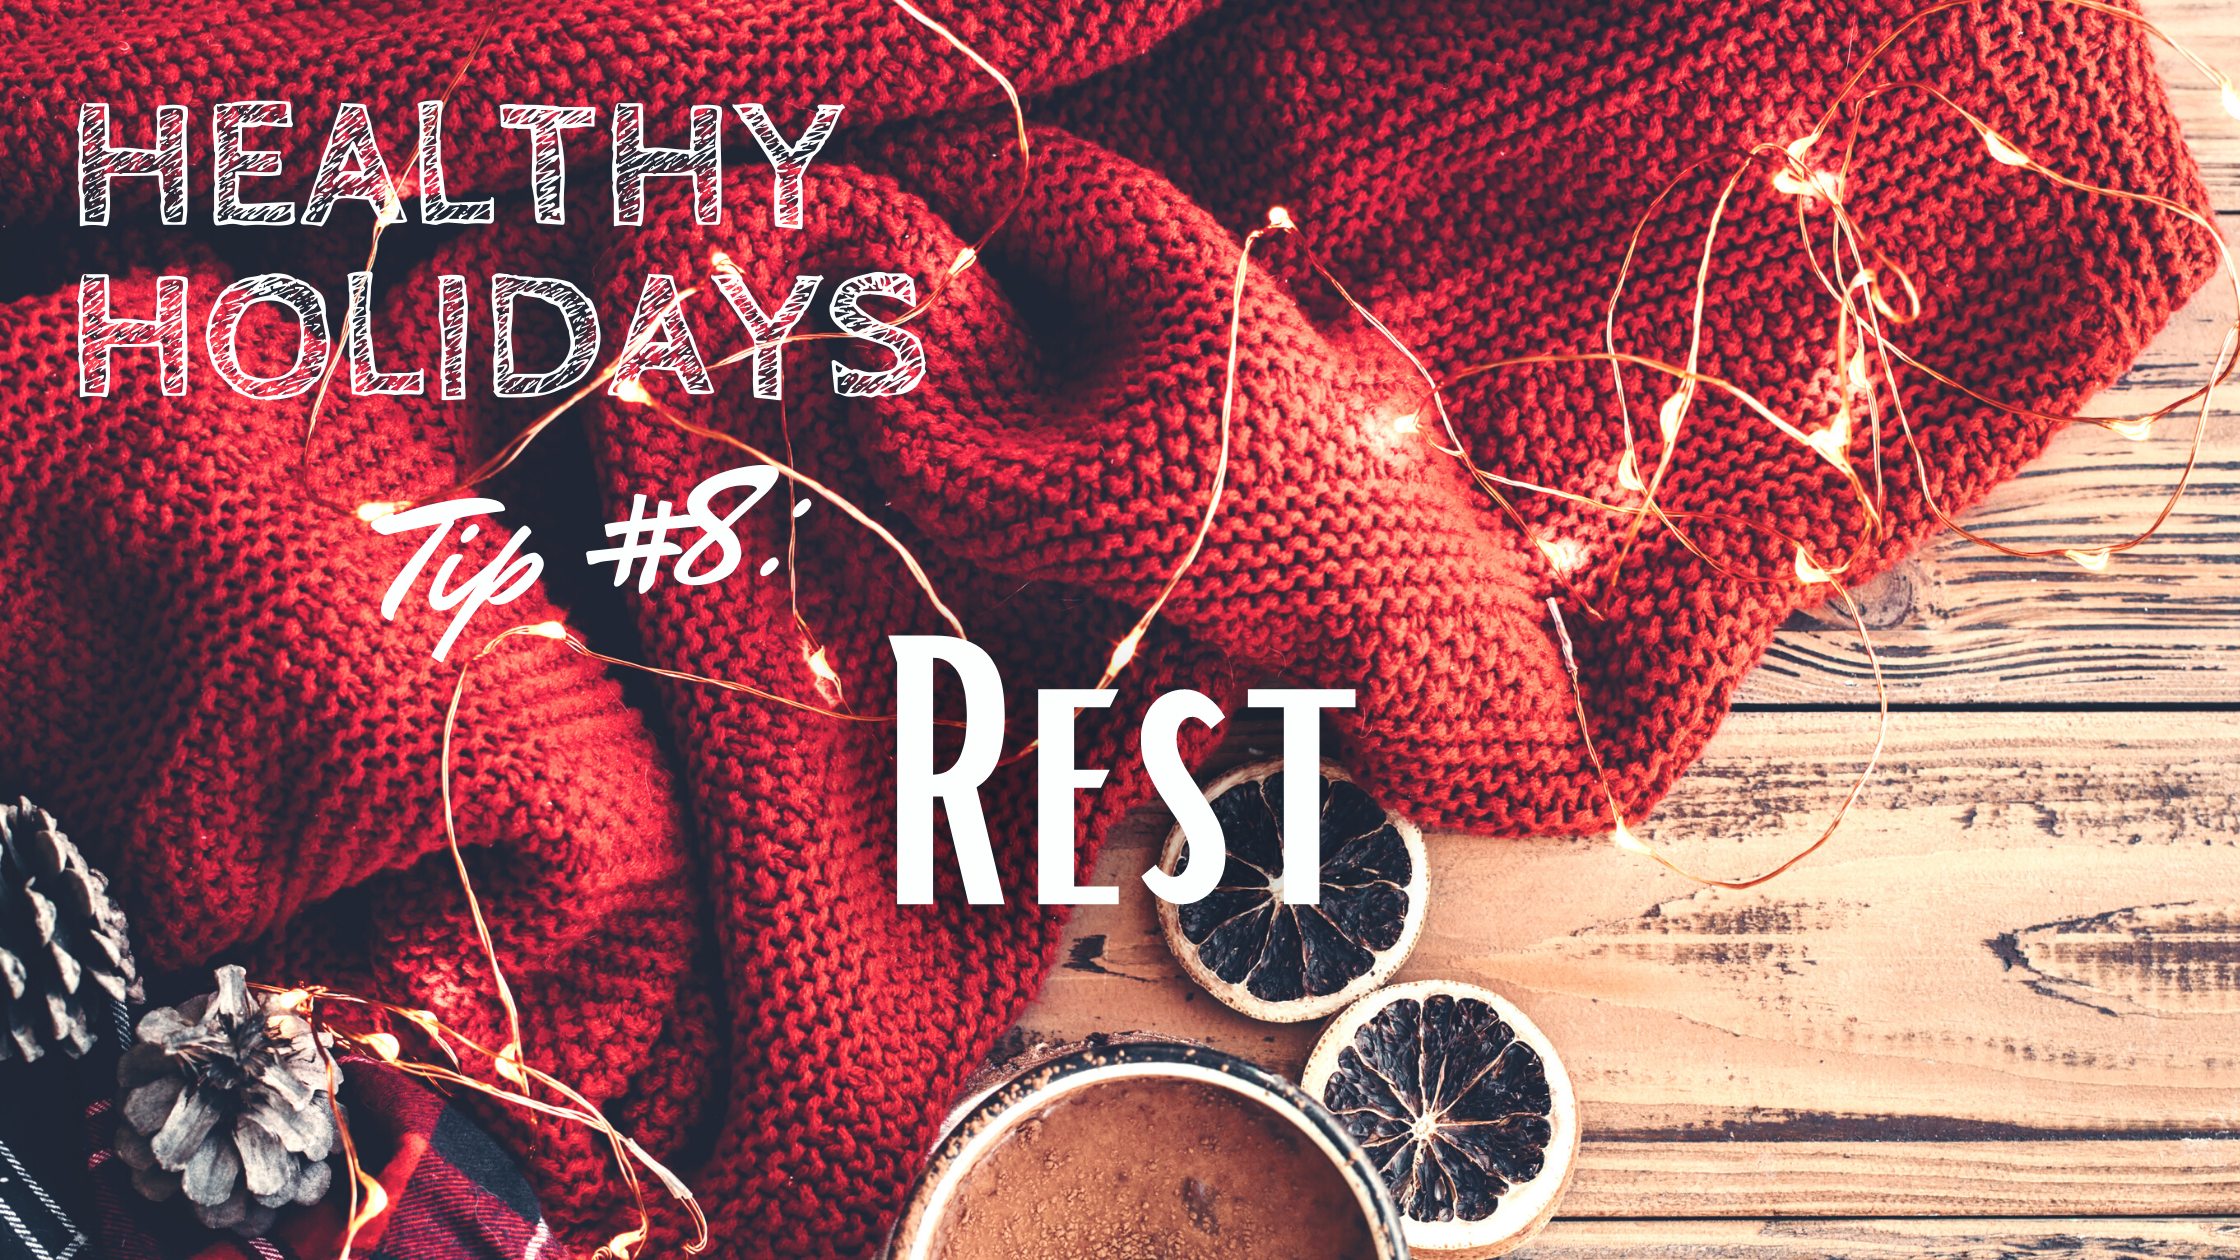 Healthy Holidays Tip 8 Rest